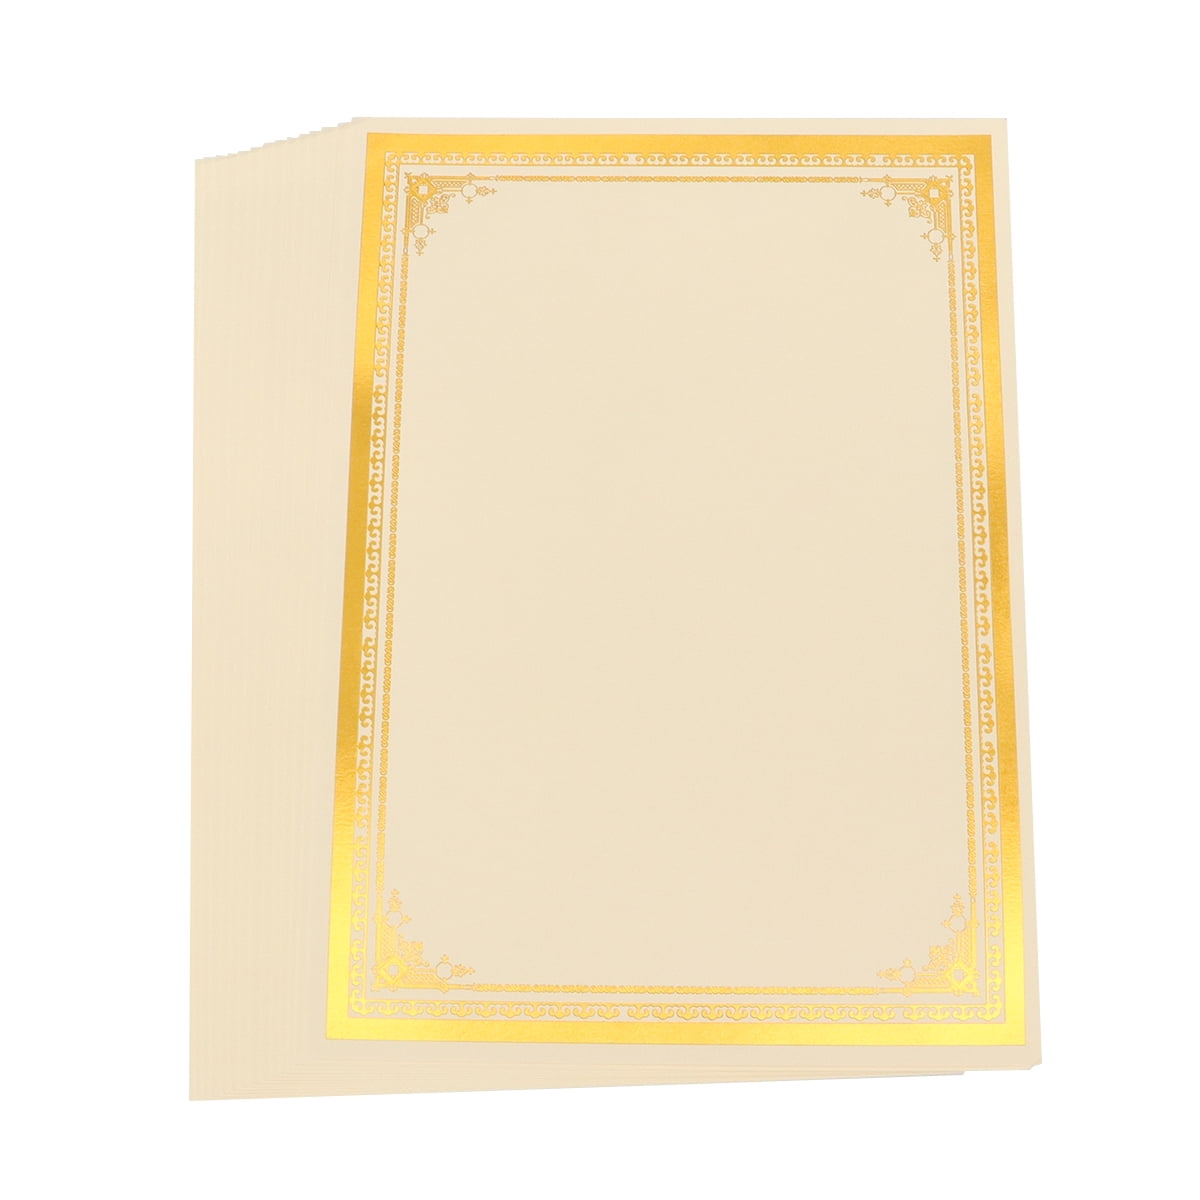 Certificate Paper Award Sheets Blank Papers Printing Diploma A4 Gold  Graduation Border Binder Filler Inner Tool Plated